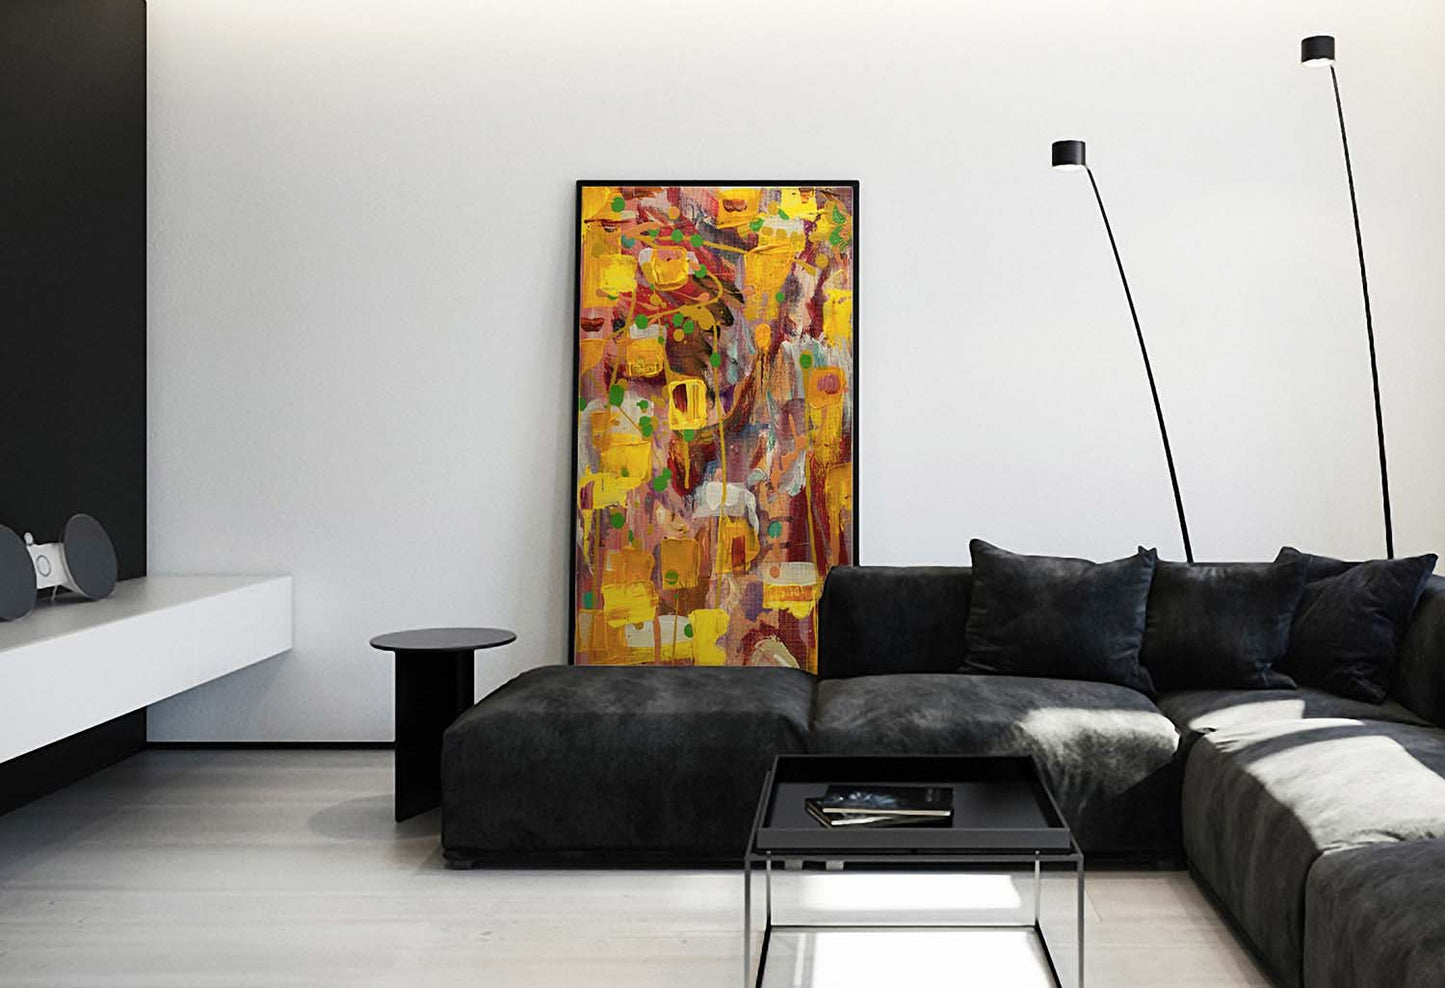 Abstract Cubist vertical art print on a living room wall above couch